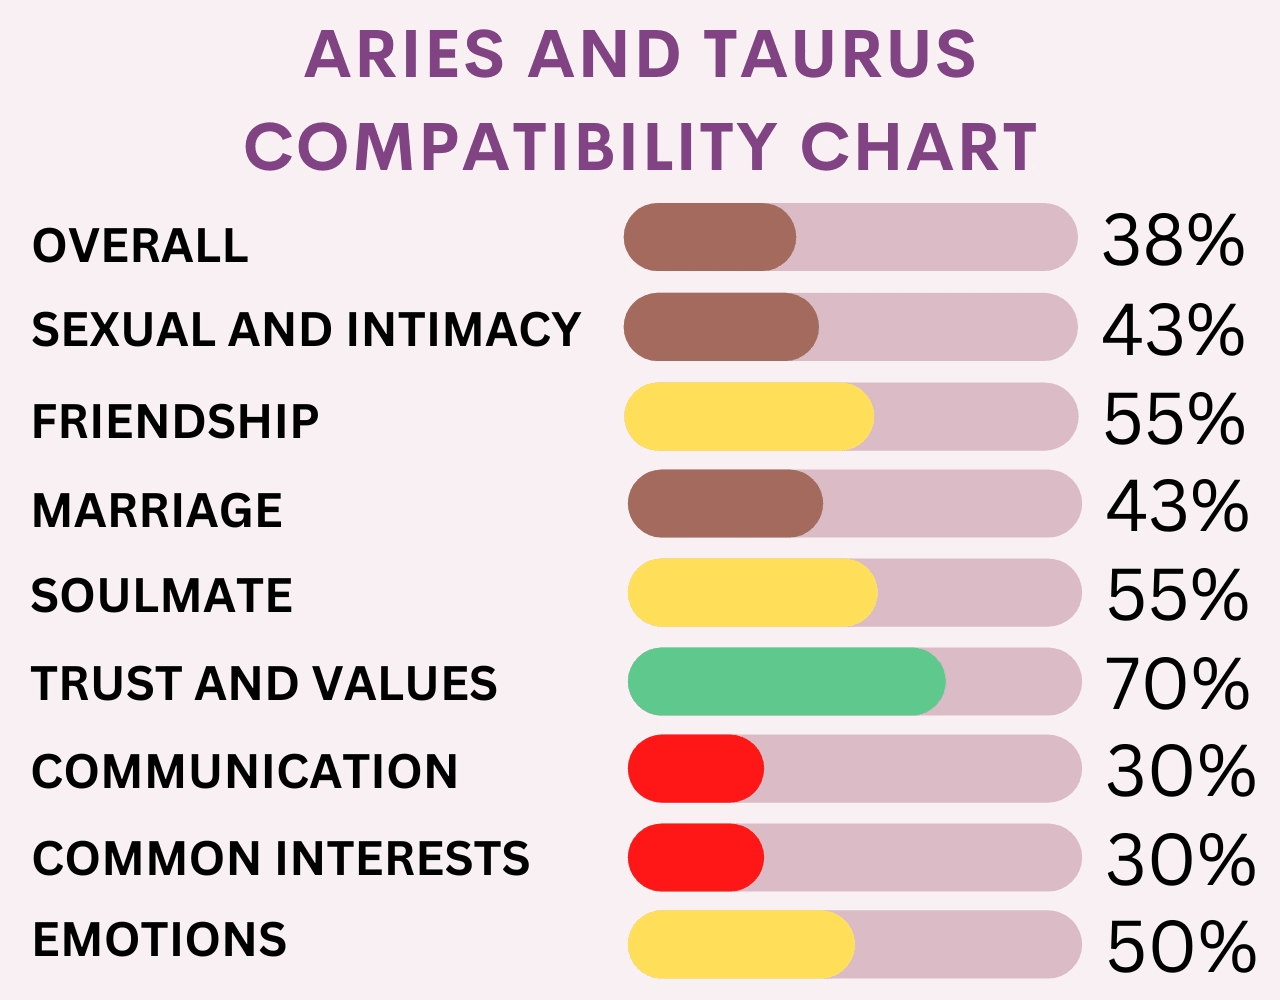 Aries and Taurus Compatibility chart with Percentages